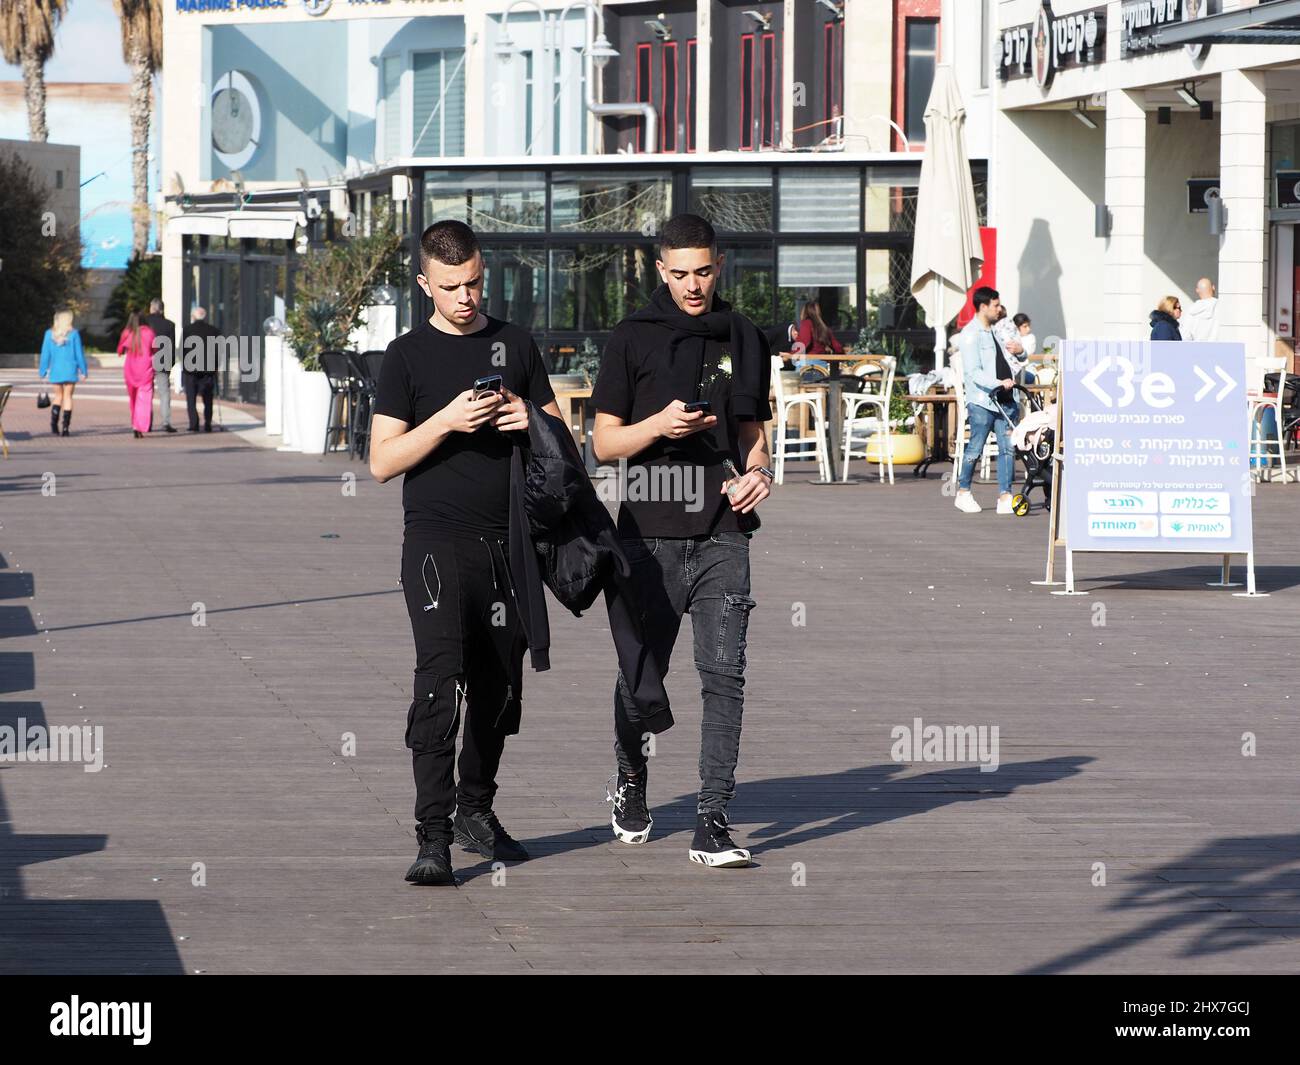 ASHKELON, ISRAEL - MARCH 04, 2022: young people looking into smartphones while walking on city street. Stock Photo